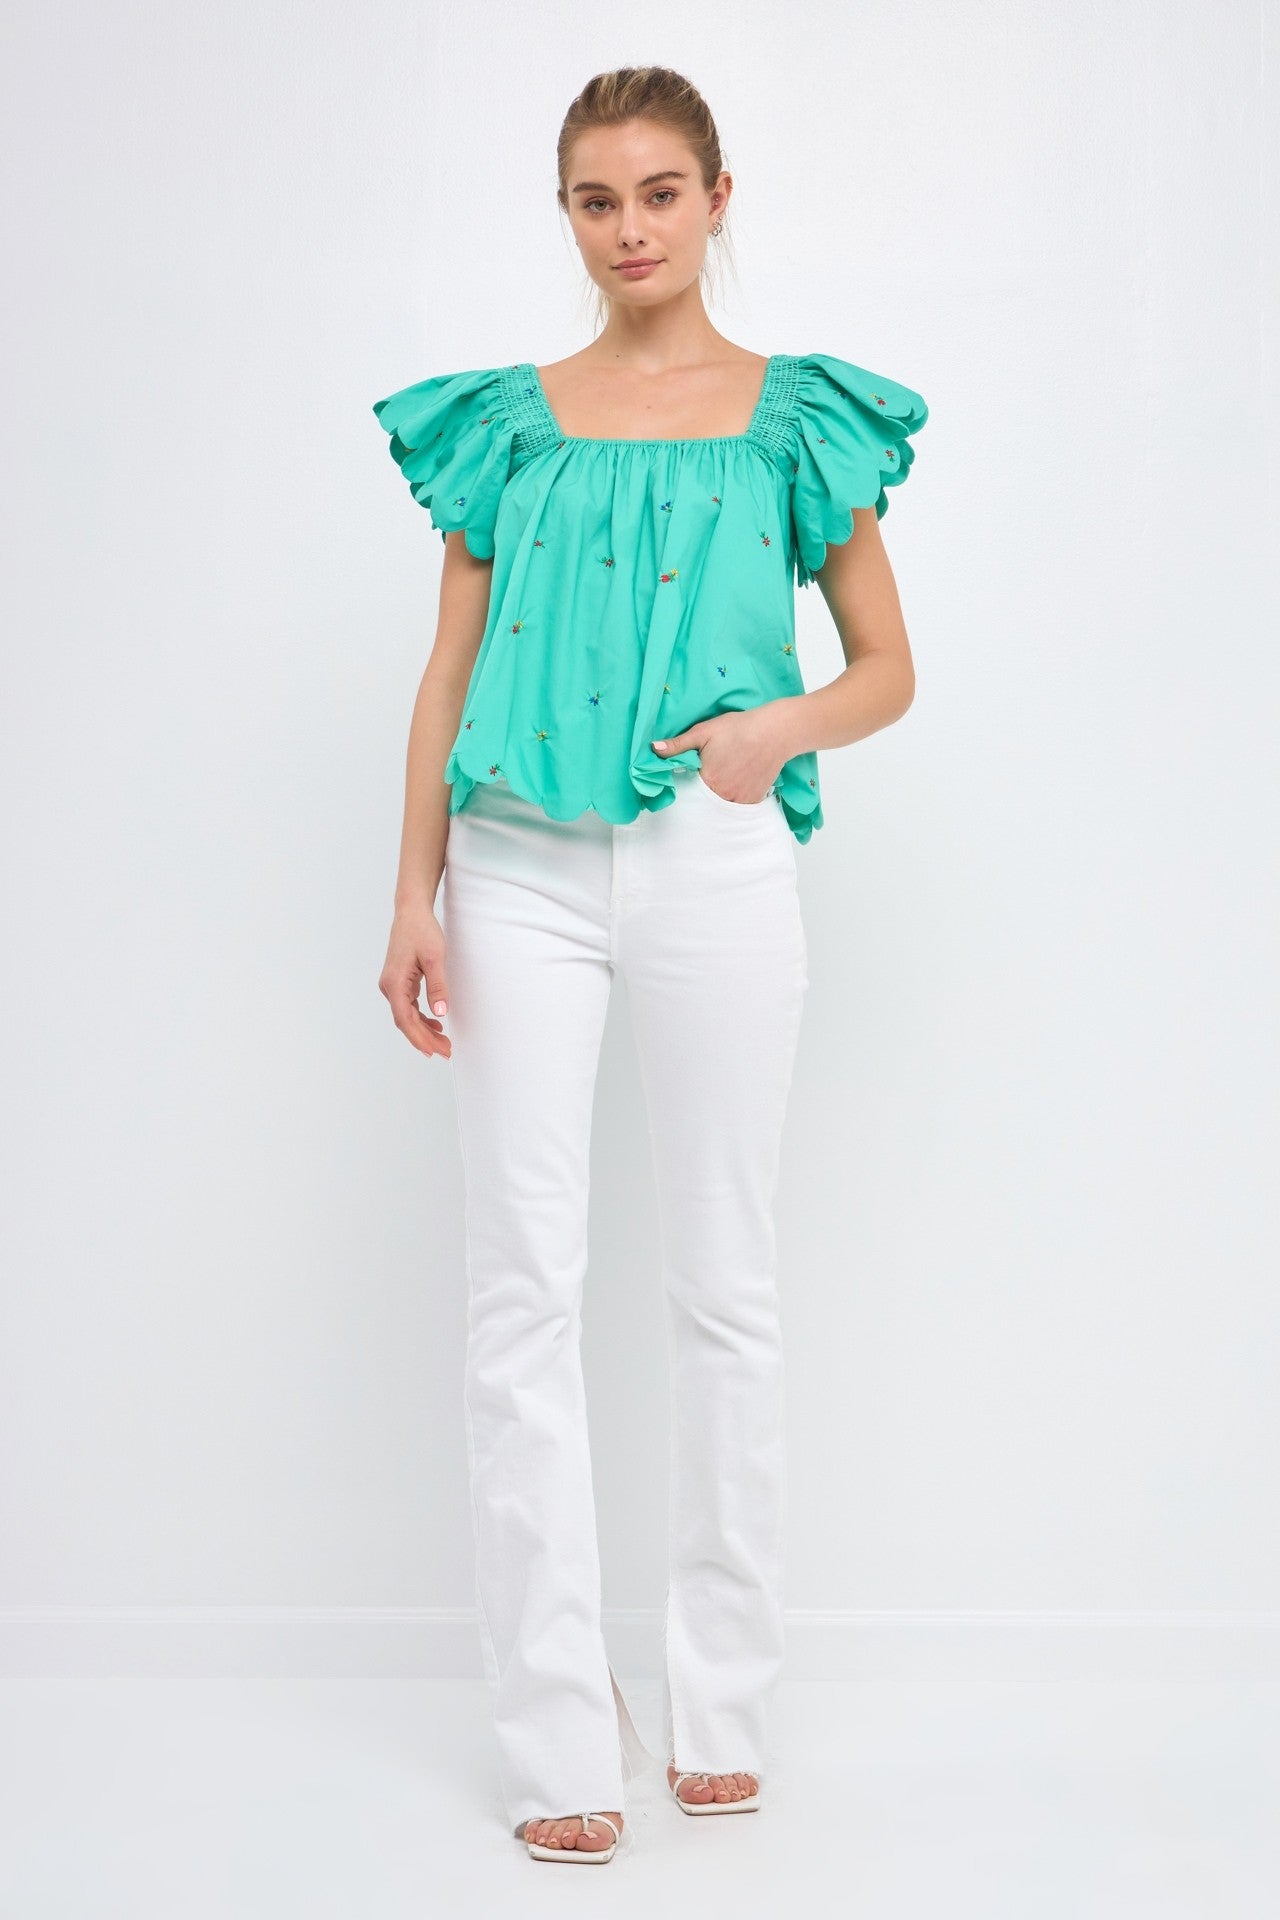 FORD SCALLOPED HEM TOP IN EMERALD